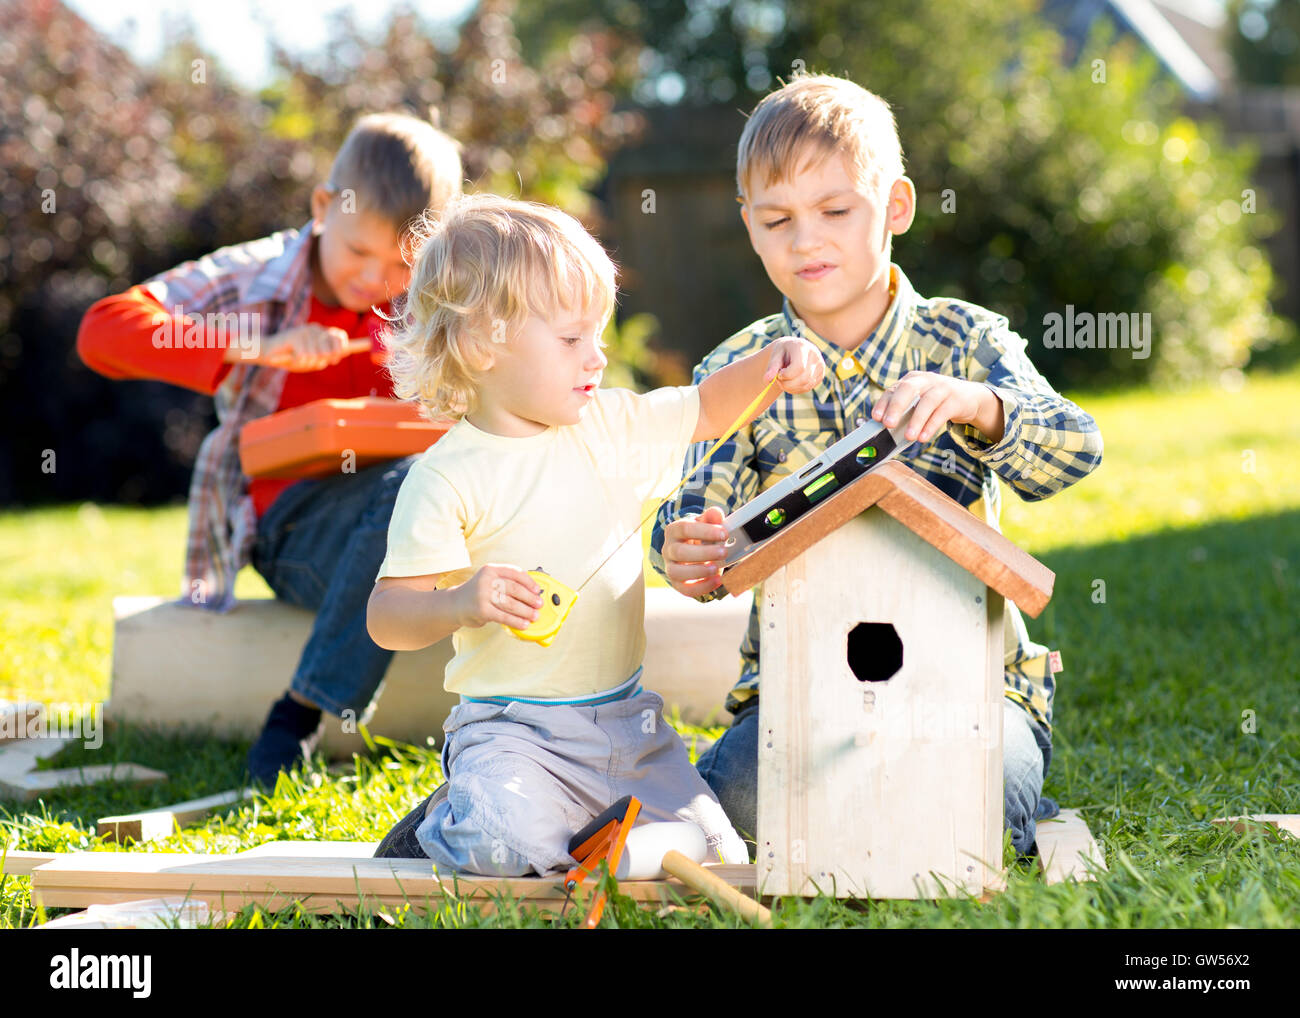 Little boys brothers building birdhouse outdoors Stock Photo